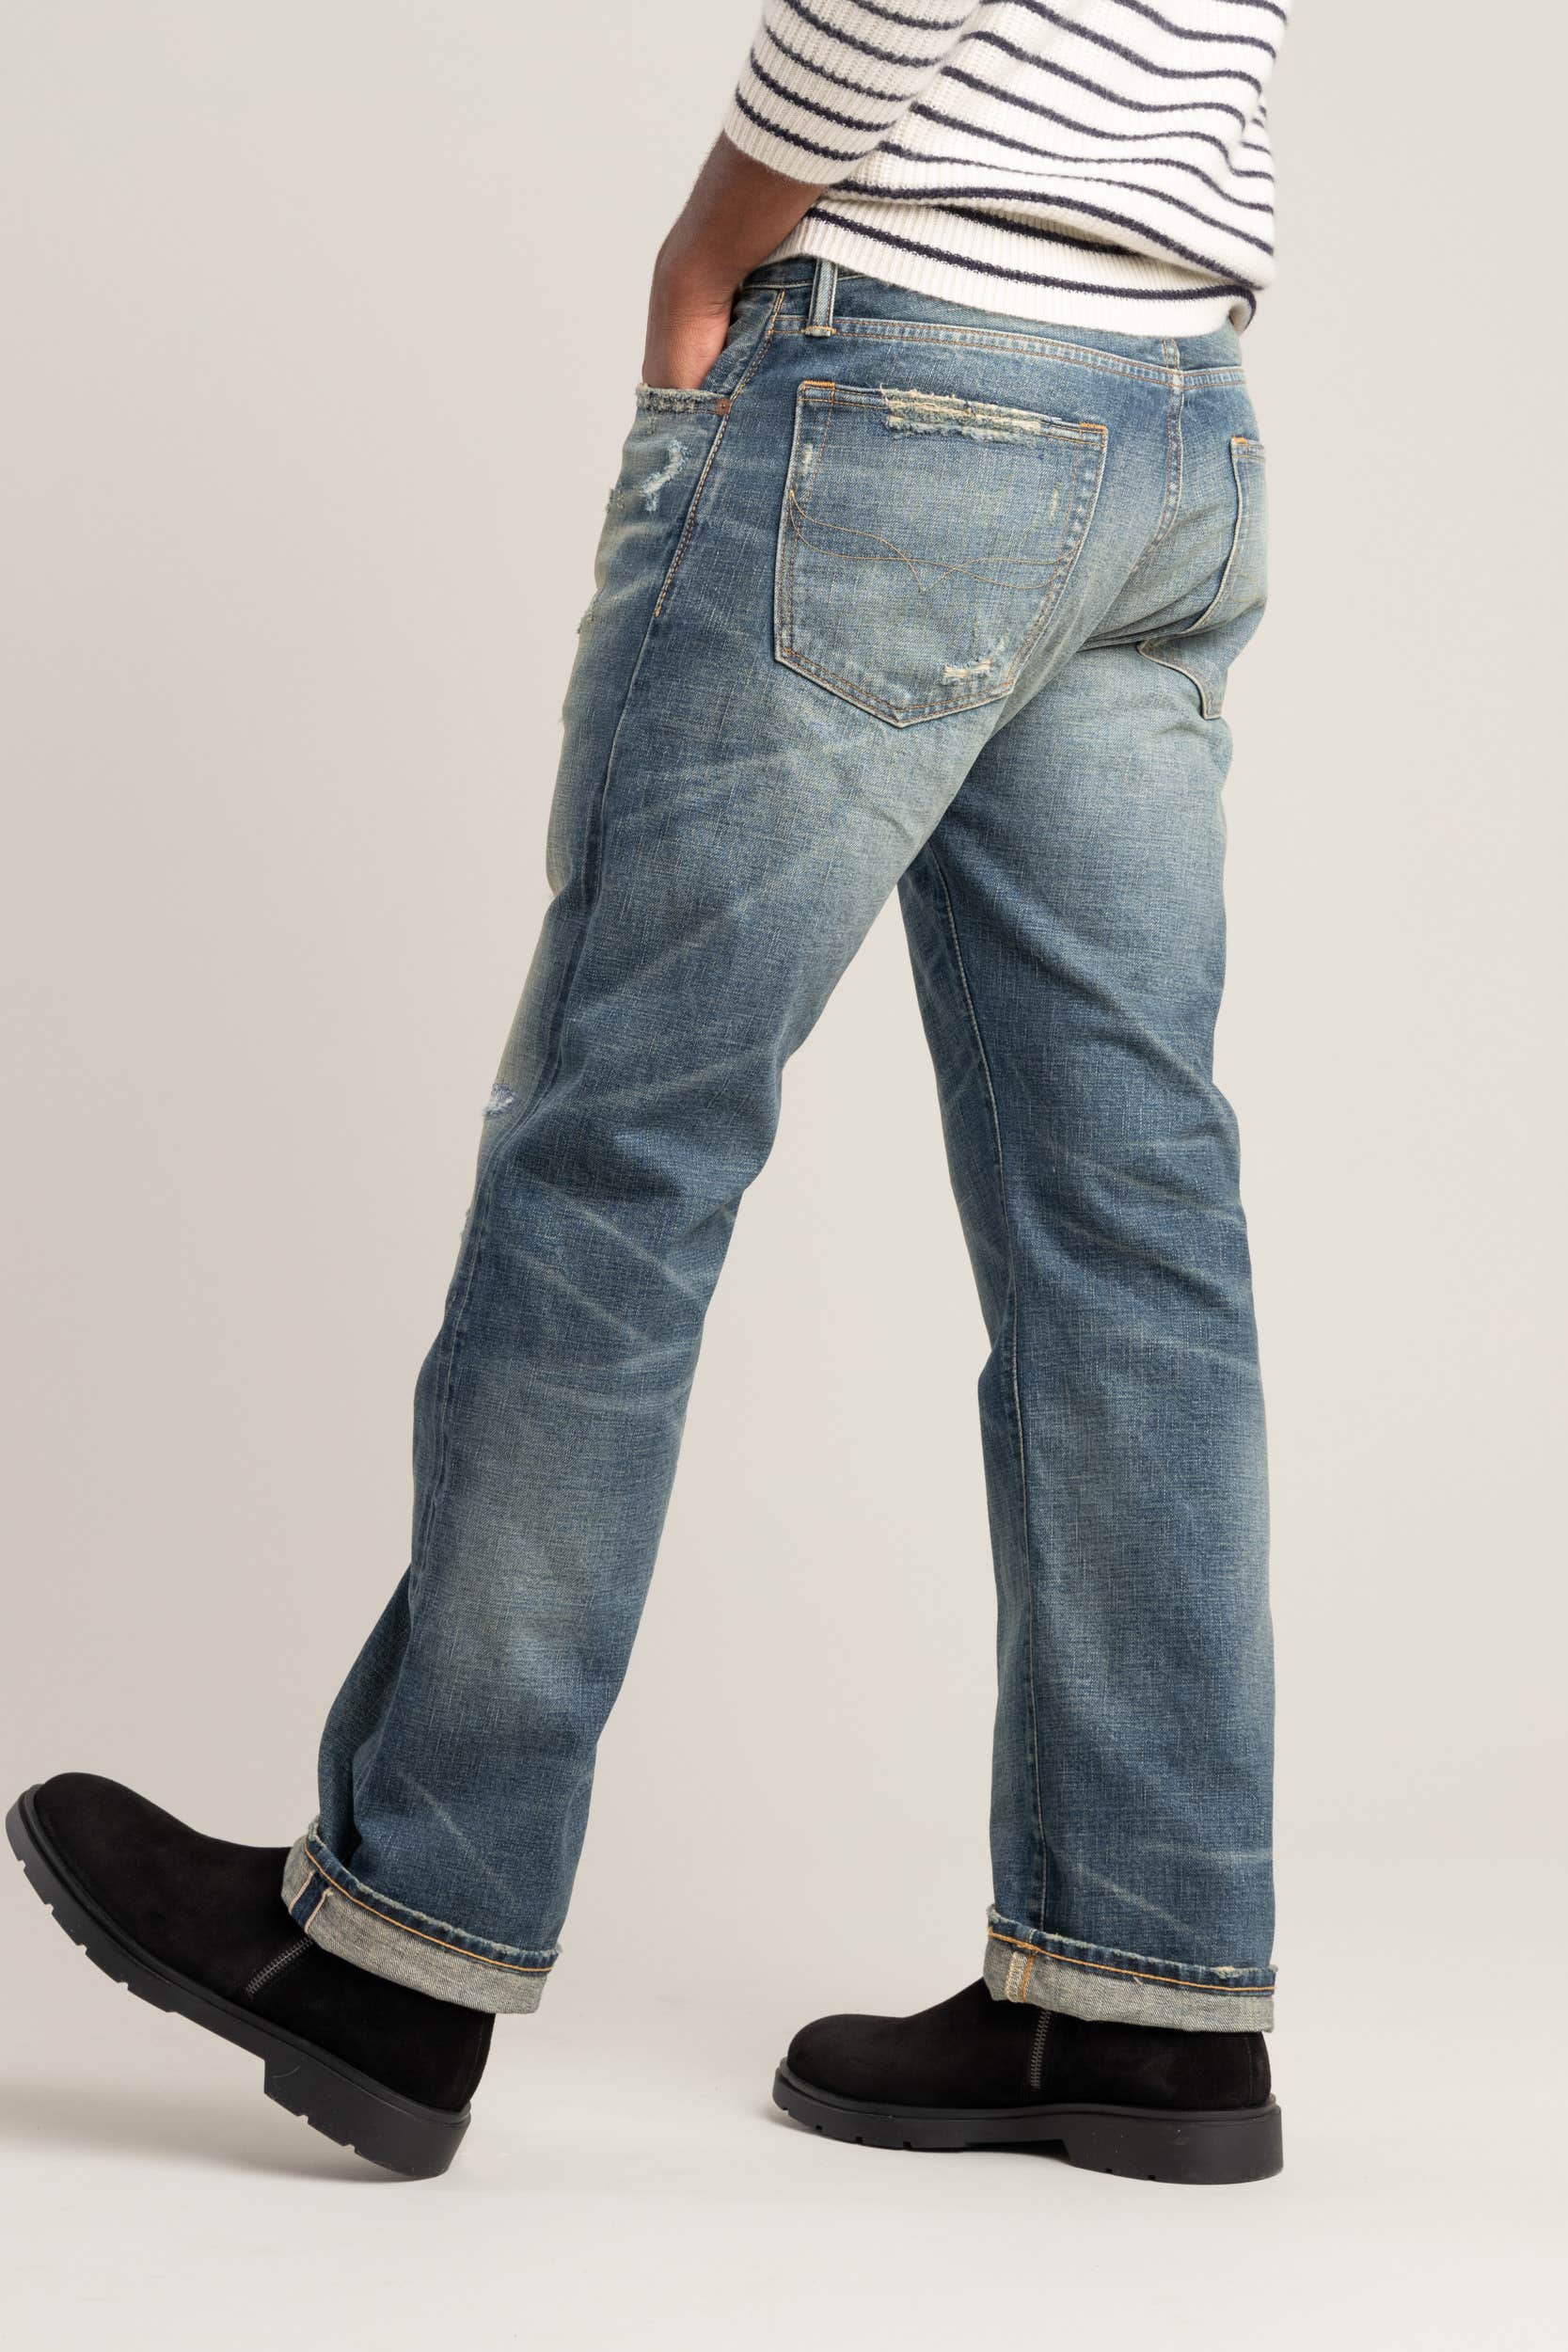 Classic Fit Distressed Selvedge Jean